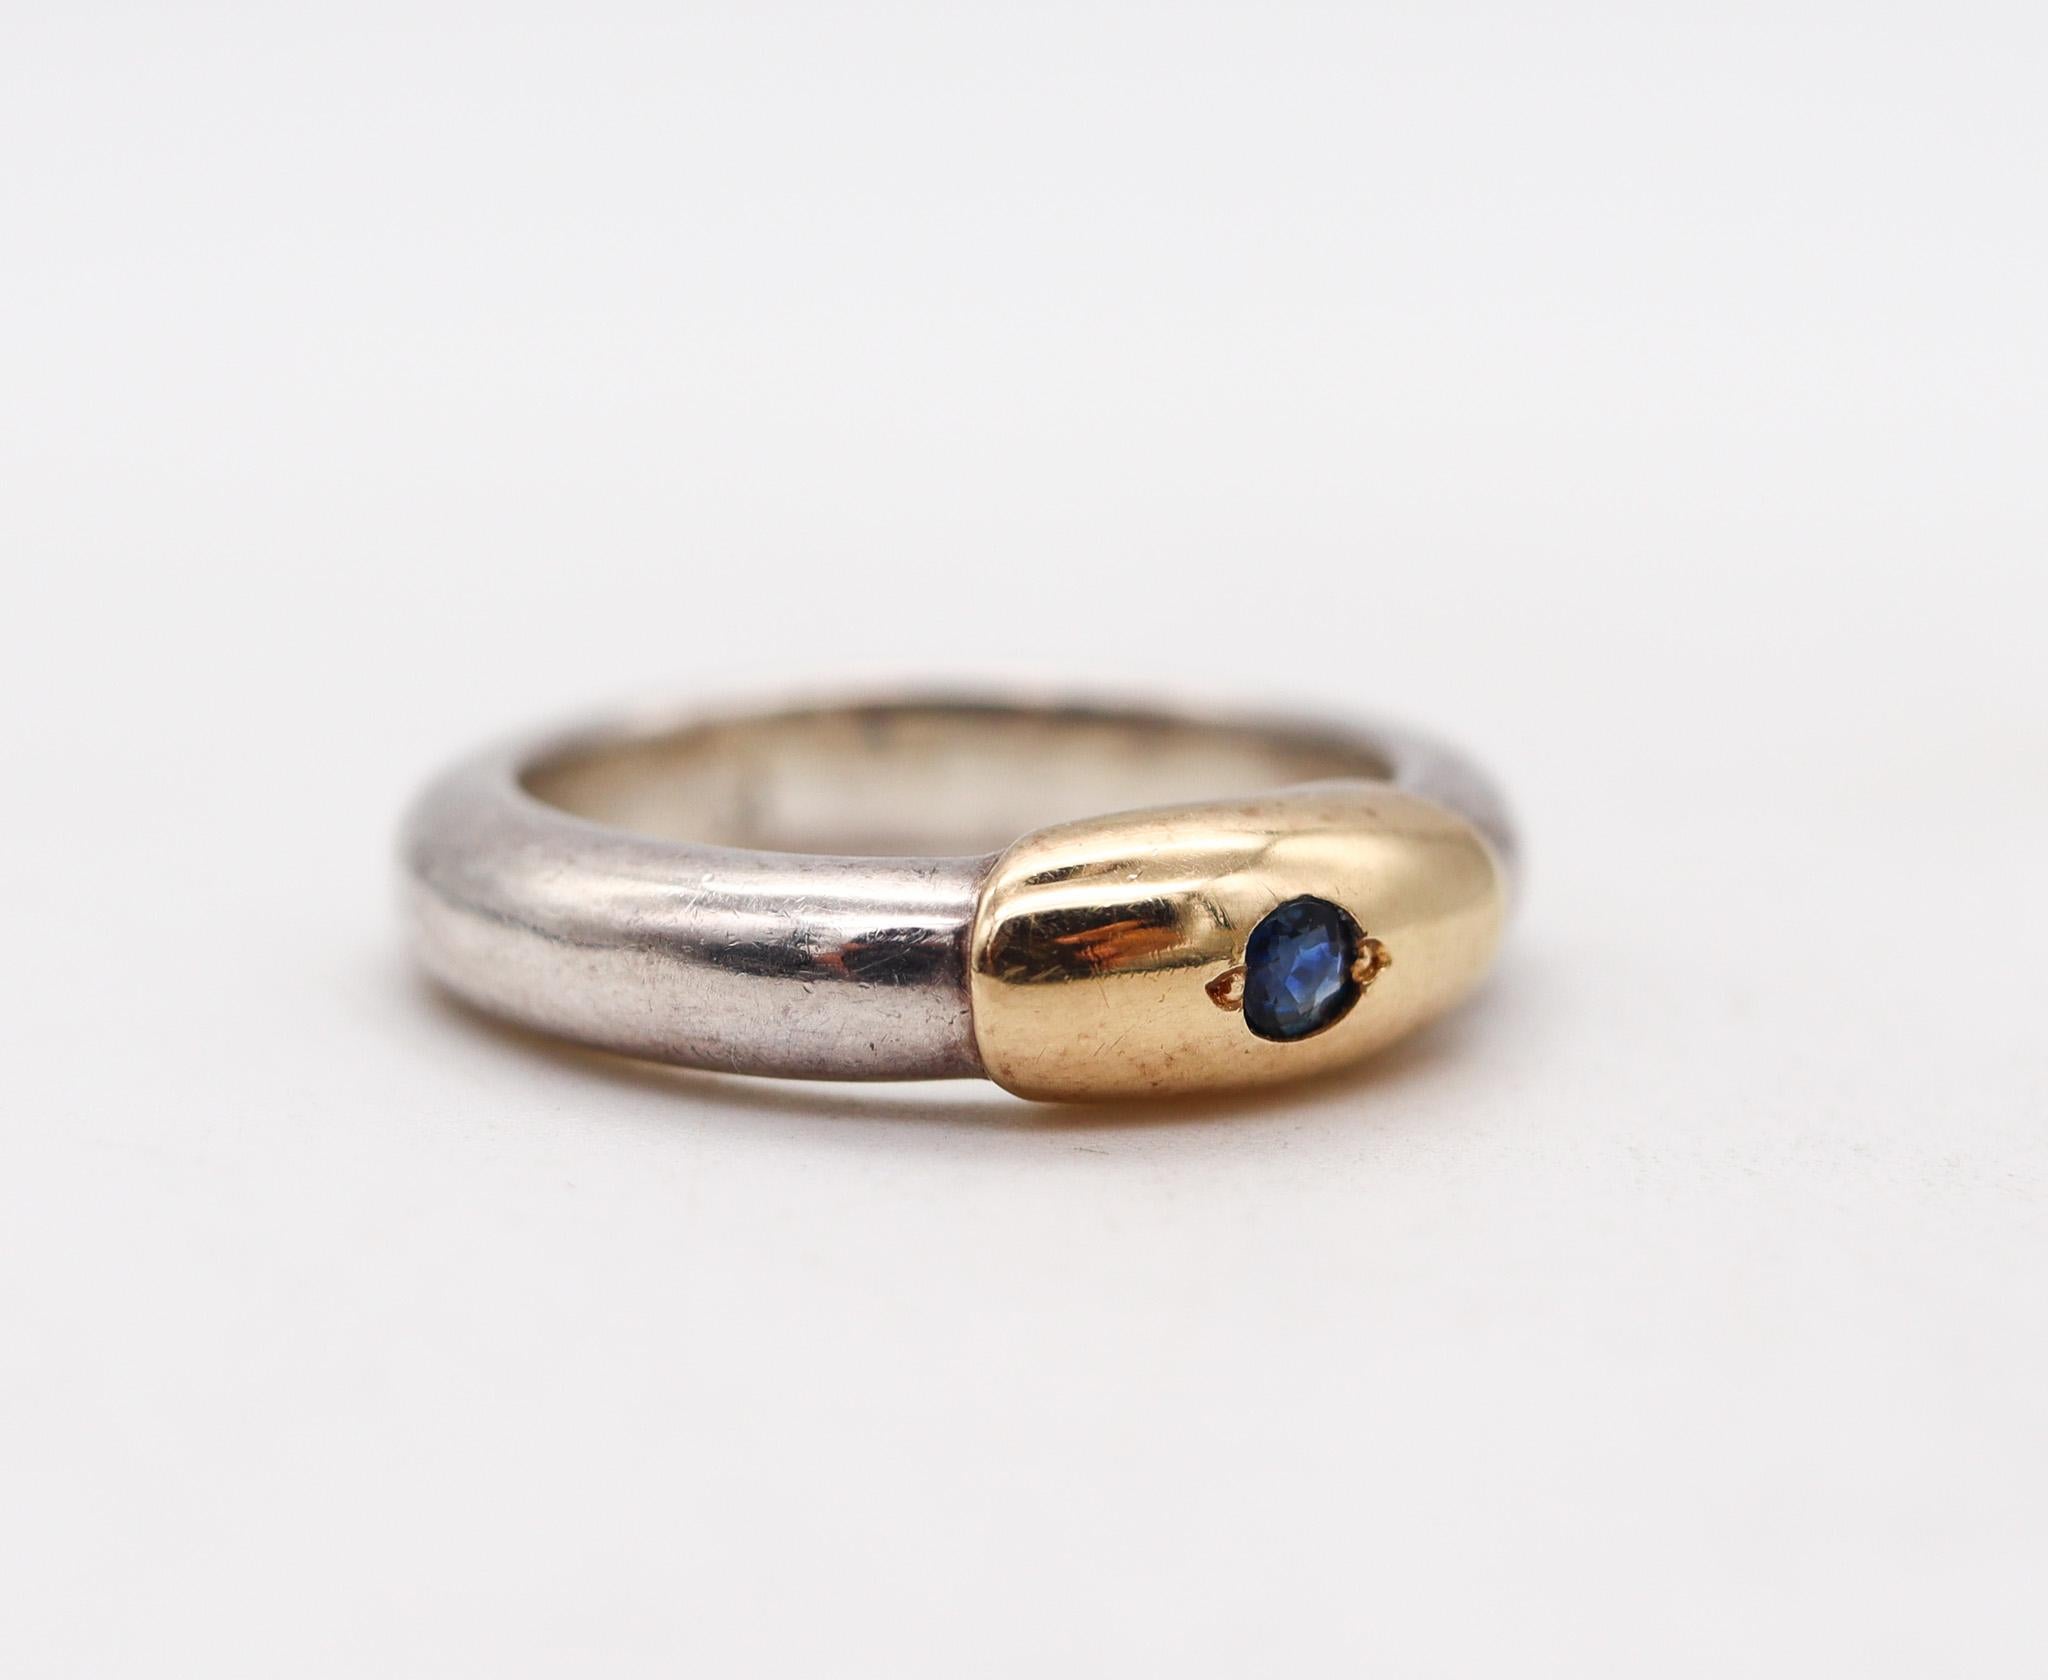 Brilliant Cut Lalaounis 1970 Greece Band Ring in 18kt Yellow Gold & Sterling with Sapphire